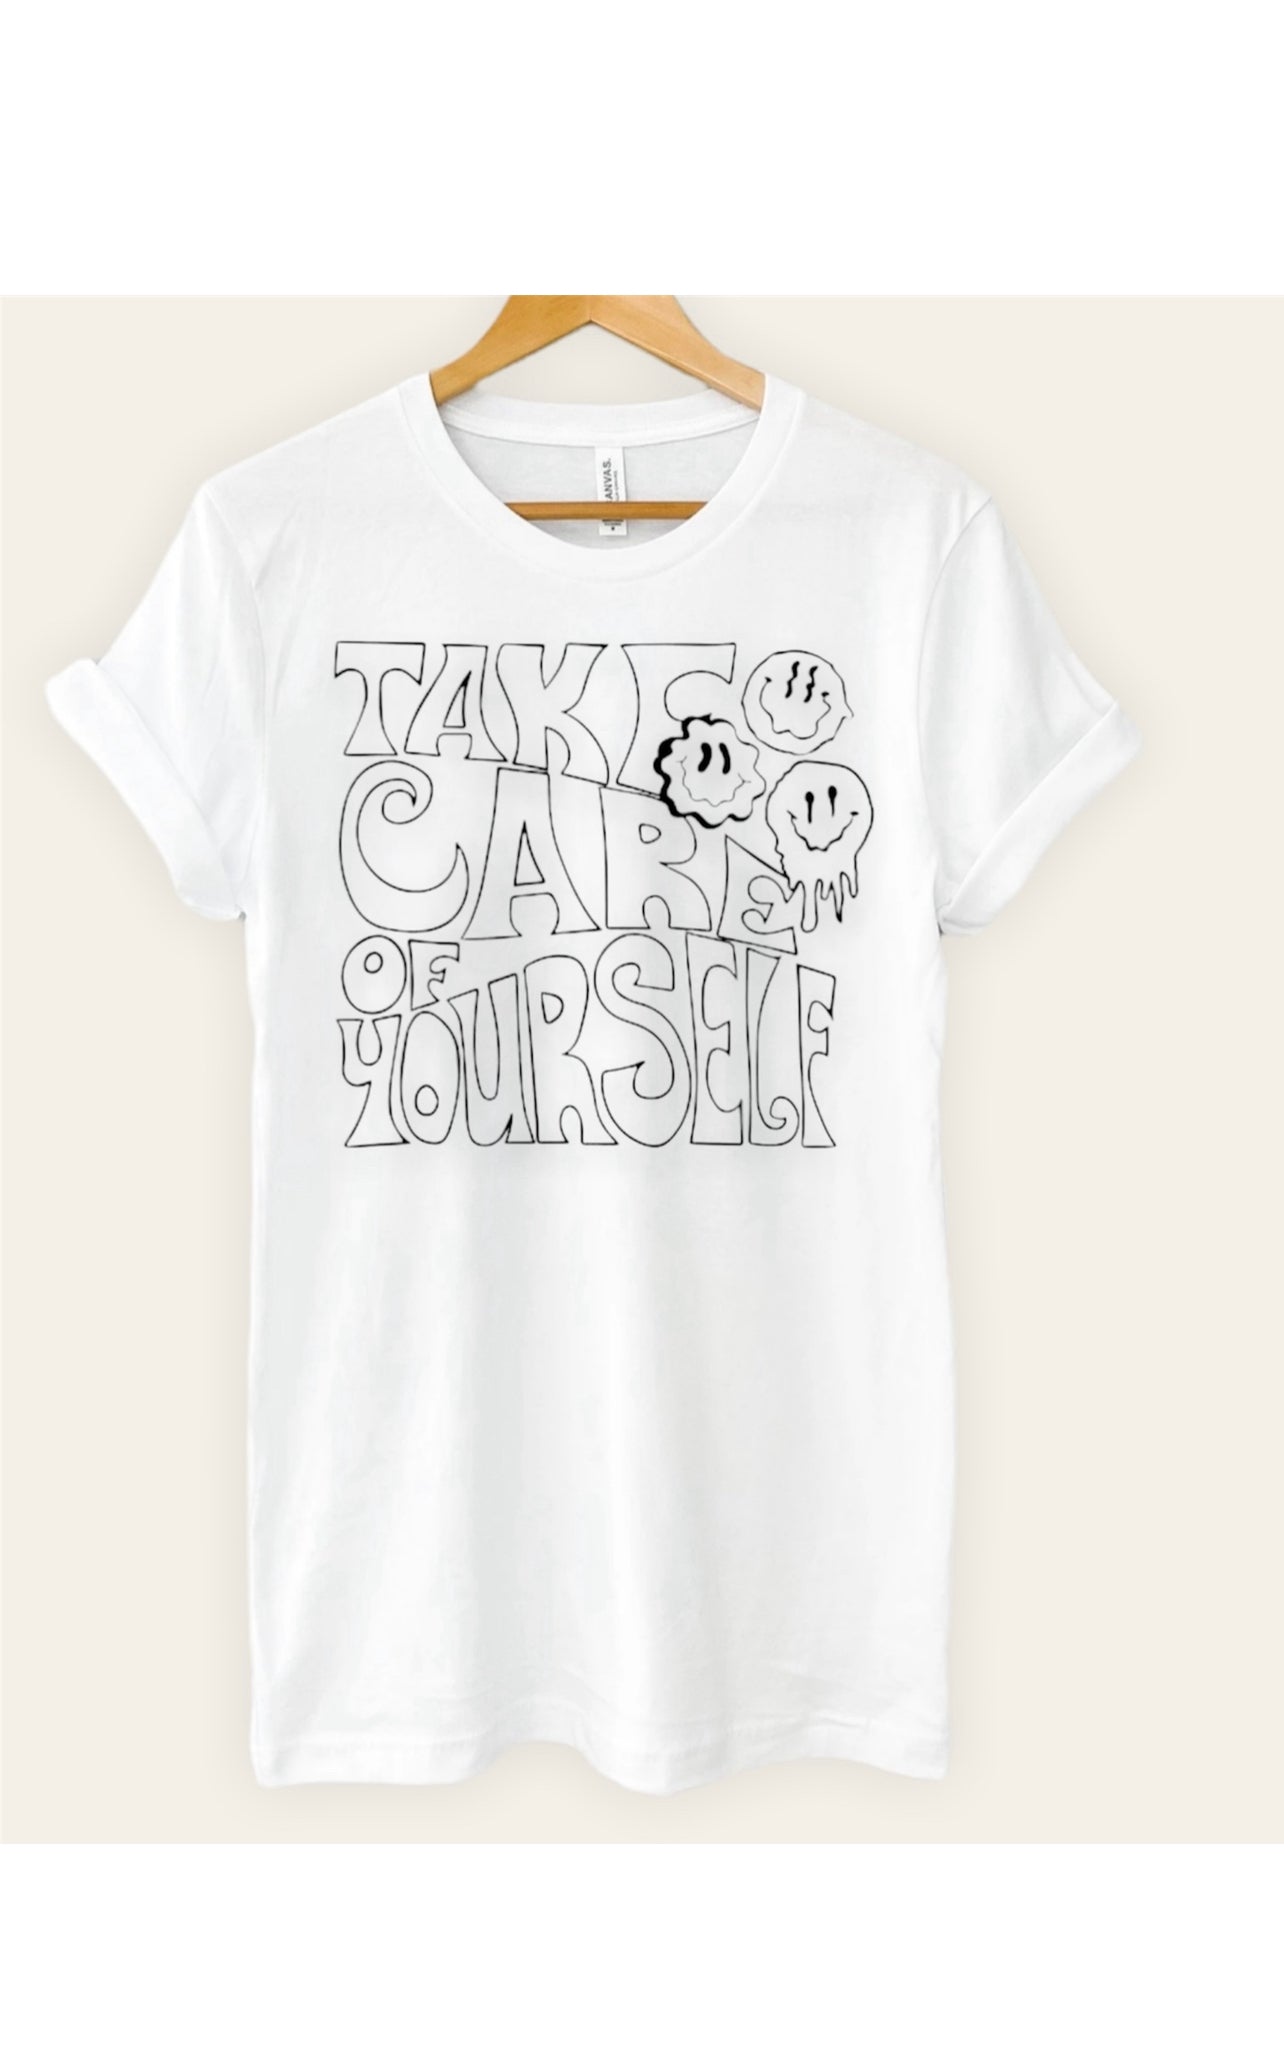 Take Care of Yourself t-shirt